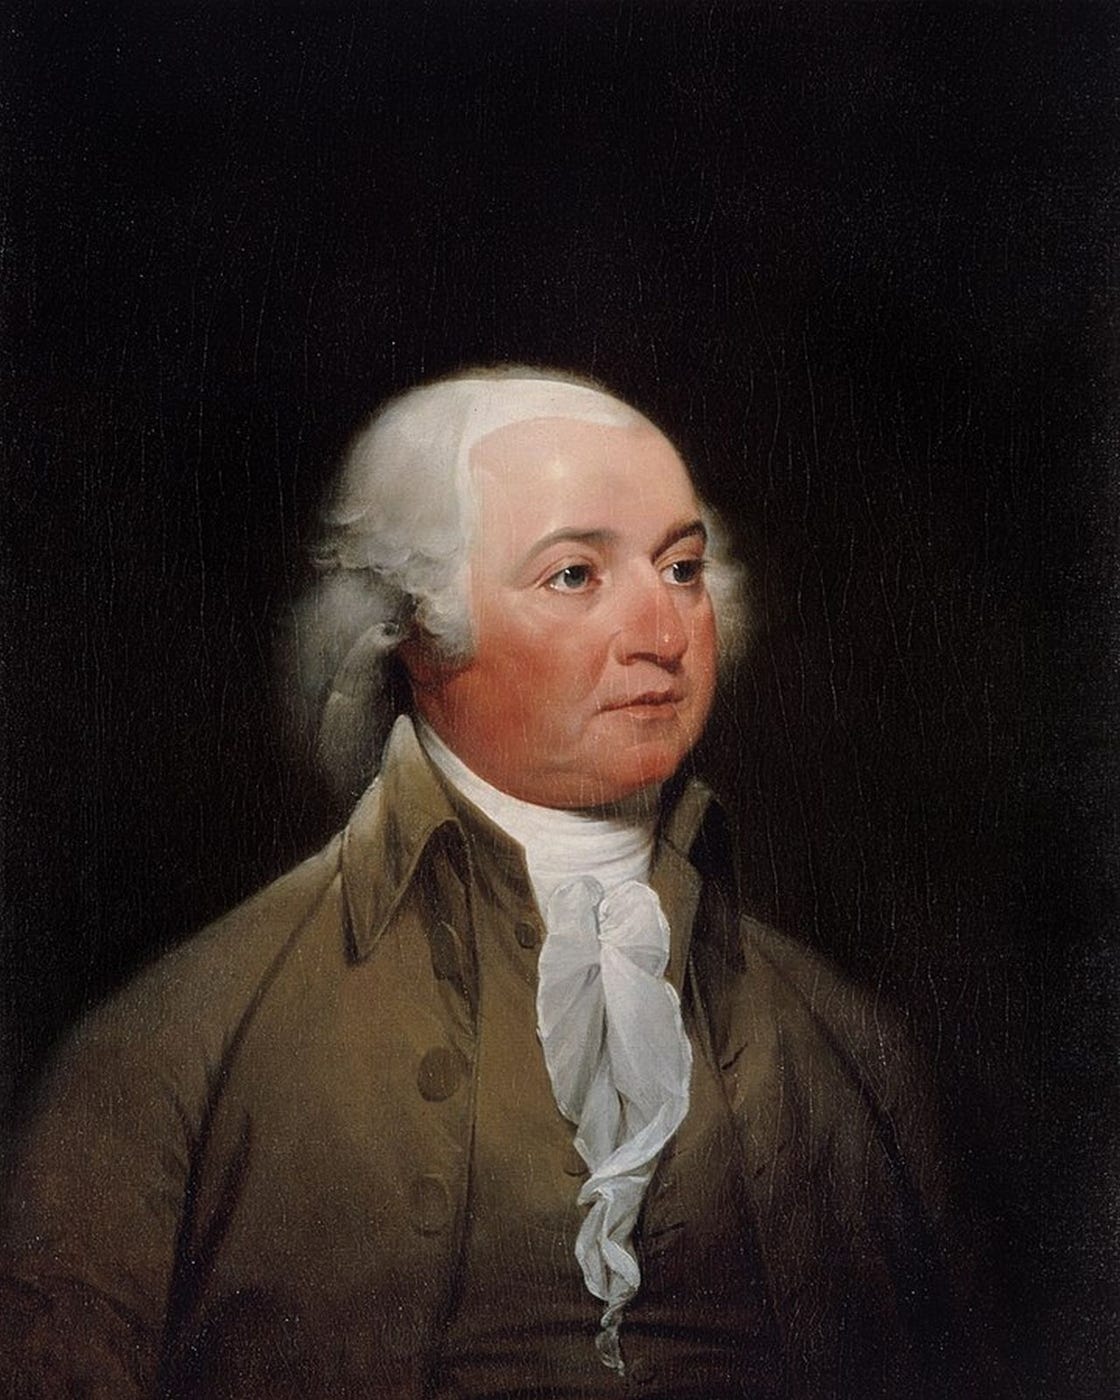 John Adams Was Buried Days Before His Son President John Quincy Adams Knew He Was Dead